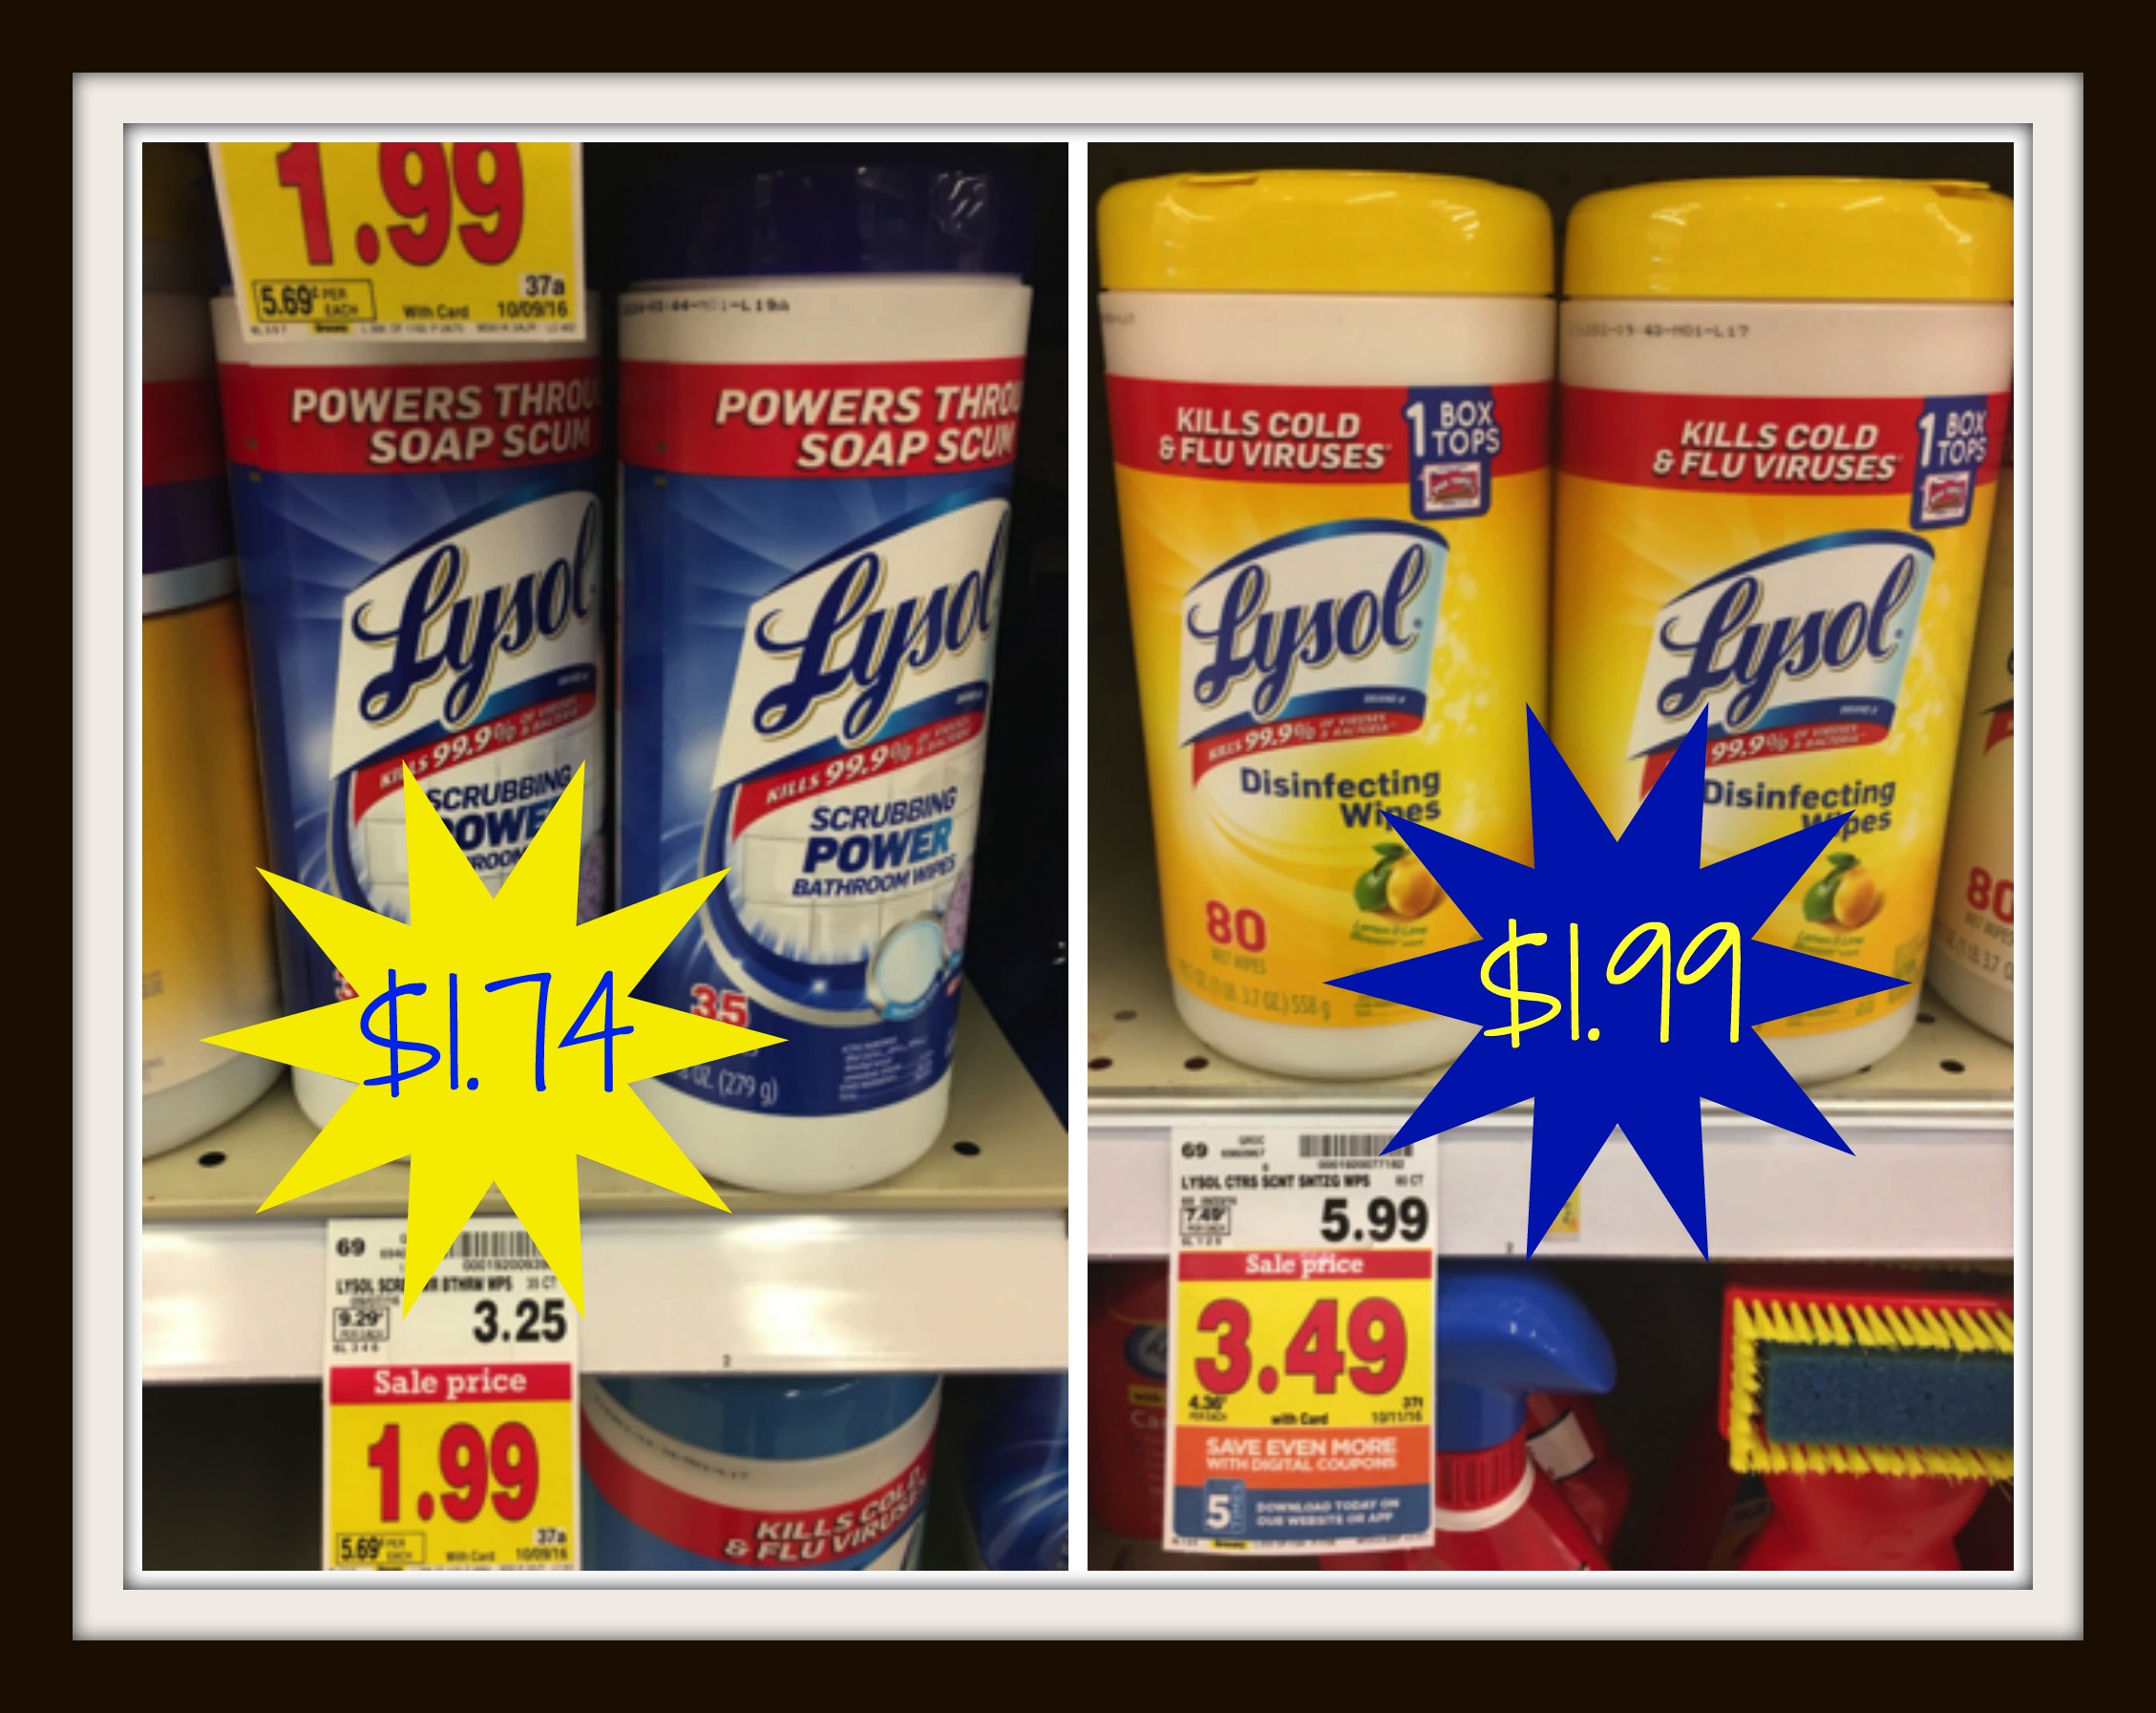 lysol-wipes-image